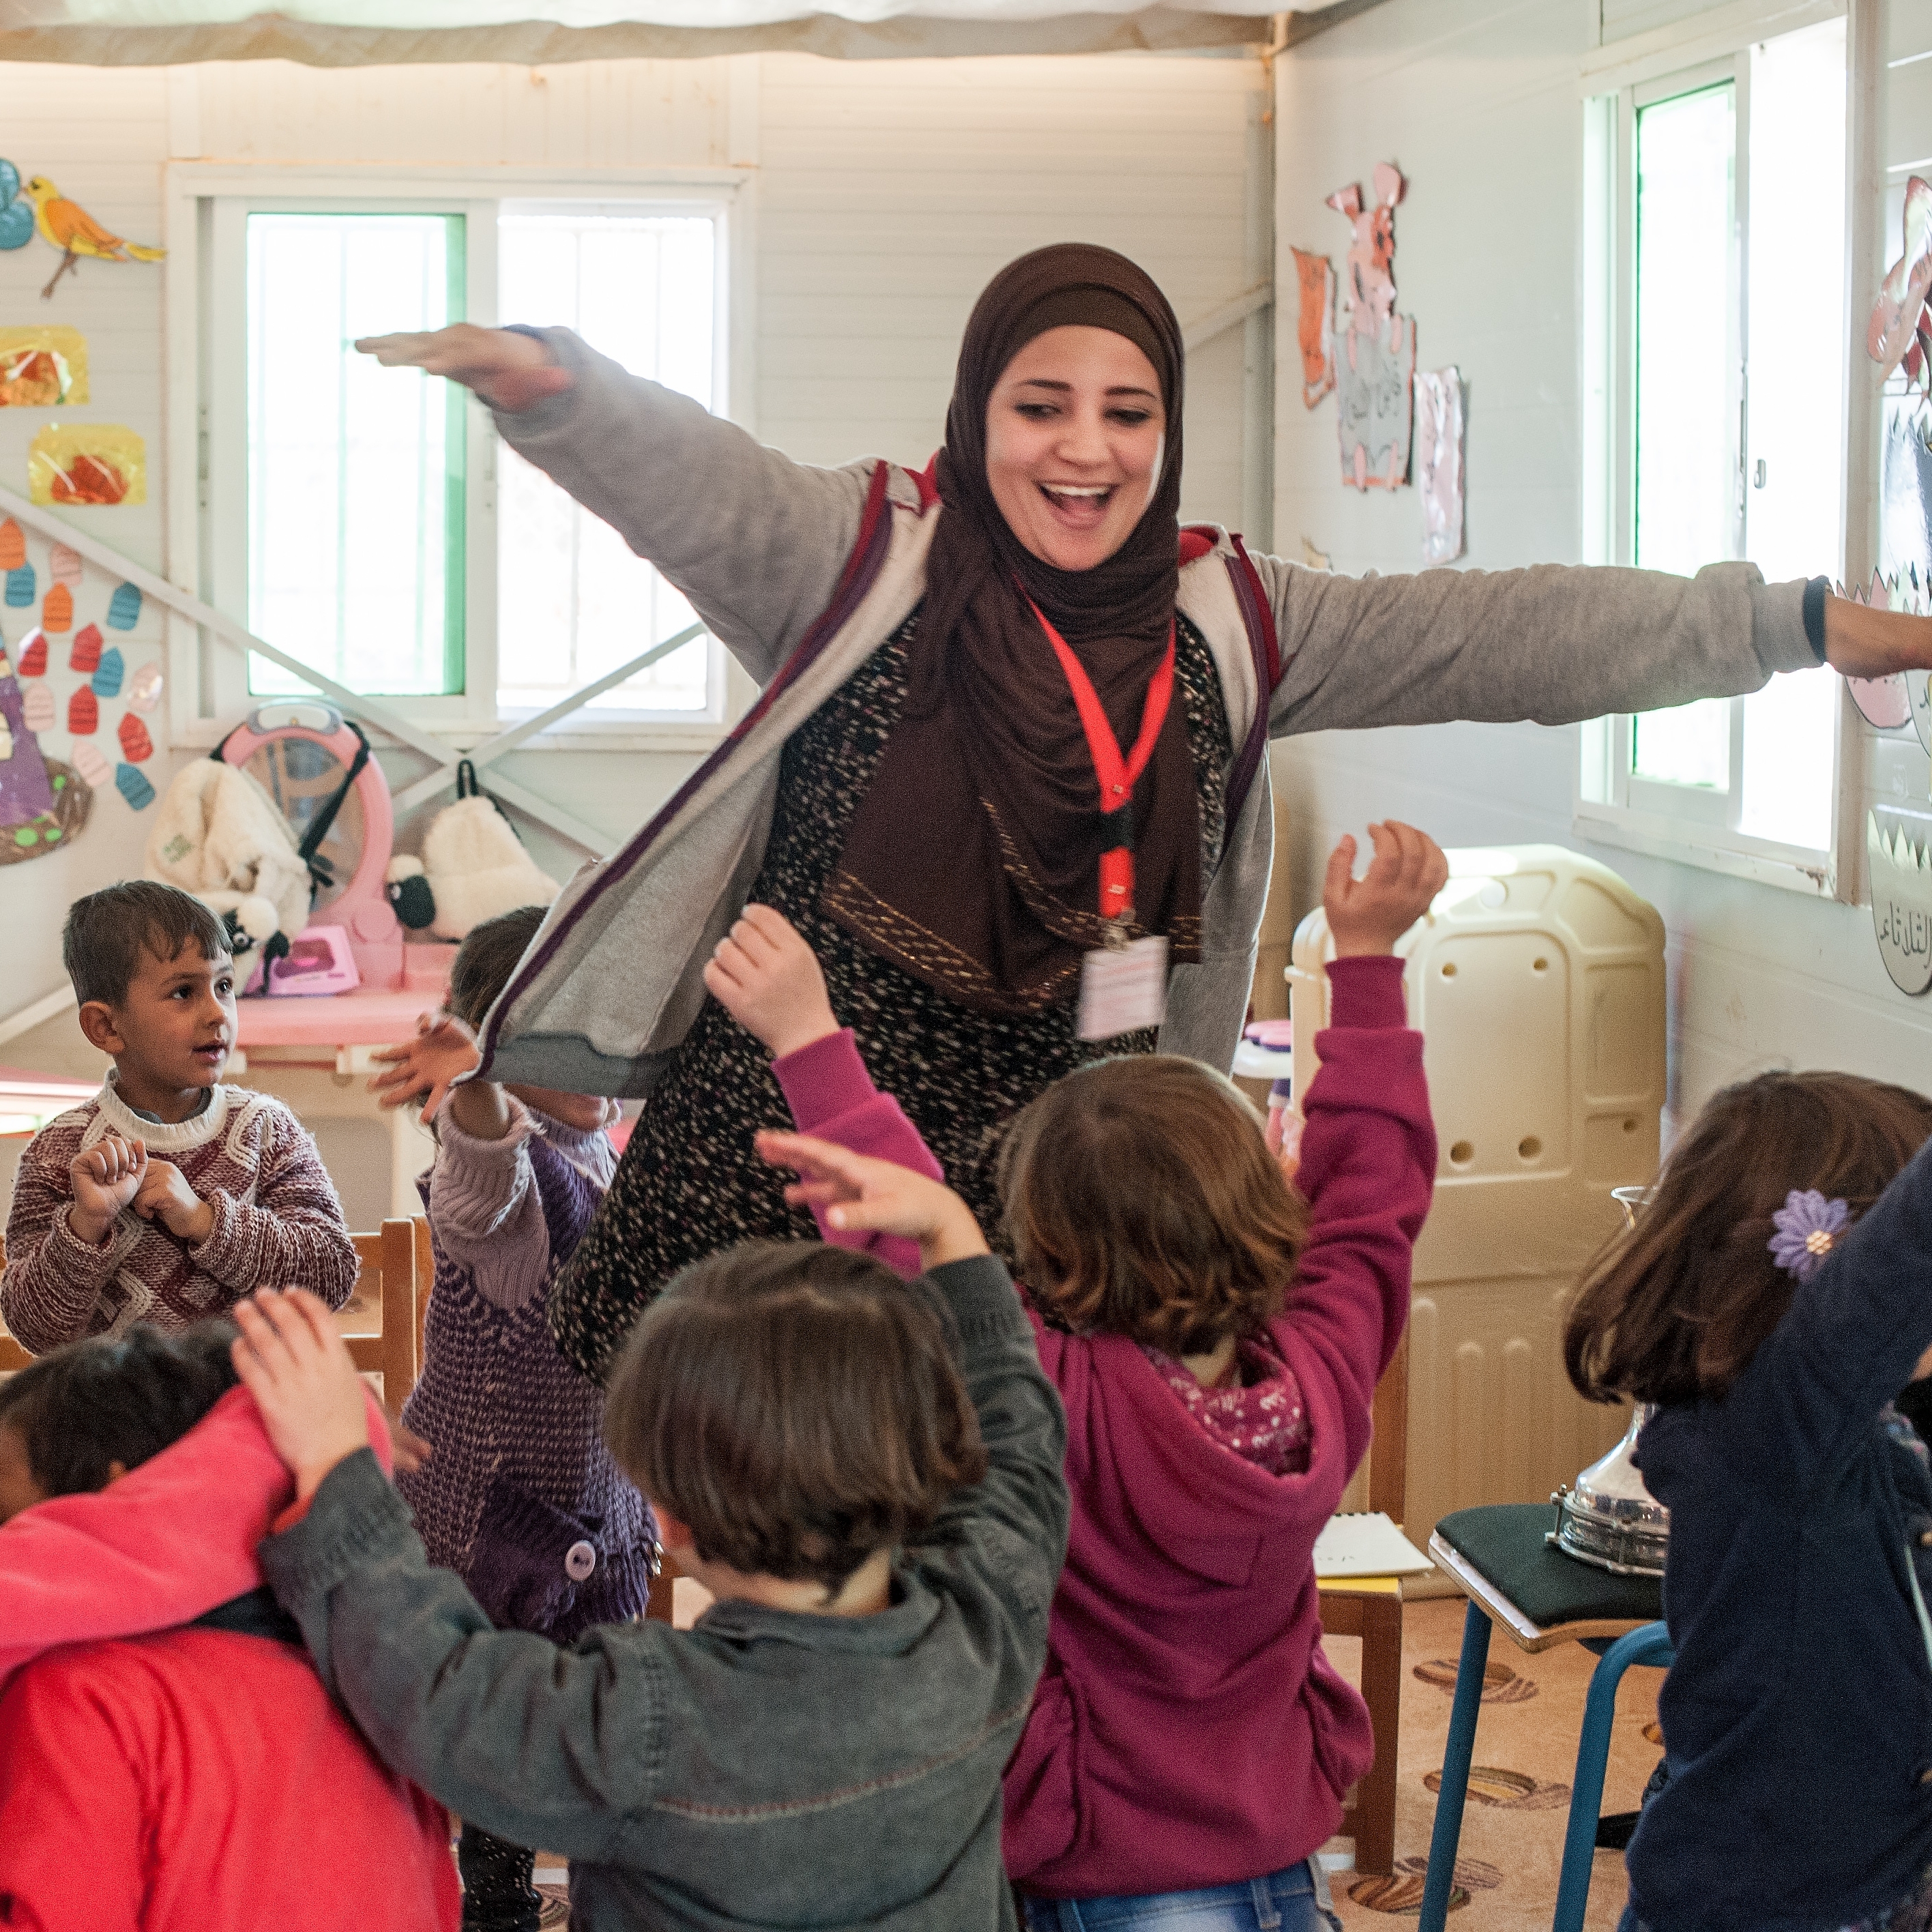 A kindergarten teacher leads her students in a music activity at a Save the Children Rainbow Kindergarten for refugee children. Every classroom runs a Healing and Education Through the Arts (HEART) activity daily. Photo credit: Susan Warner/Save the Children, December 2016.